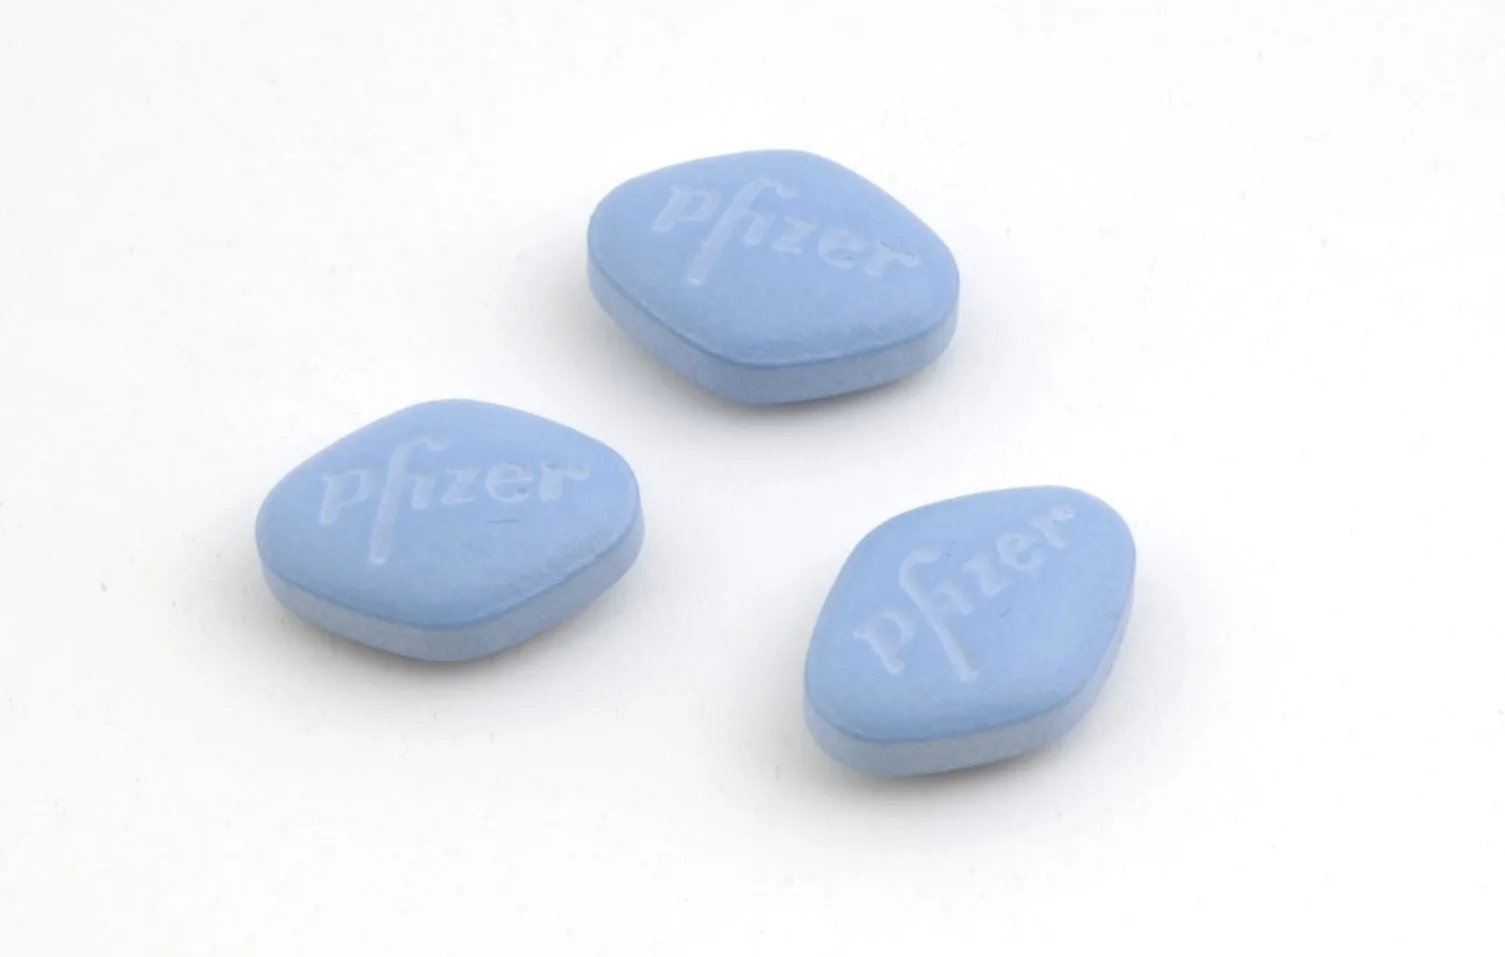 Viagra may reduce Alzheimers risk by 60 study suggests